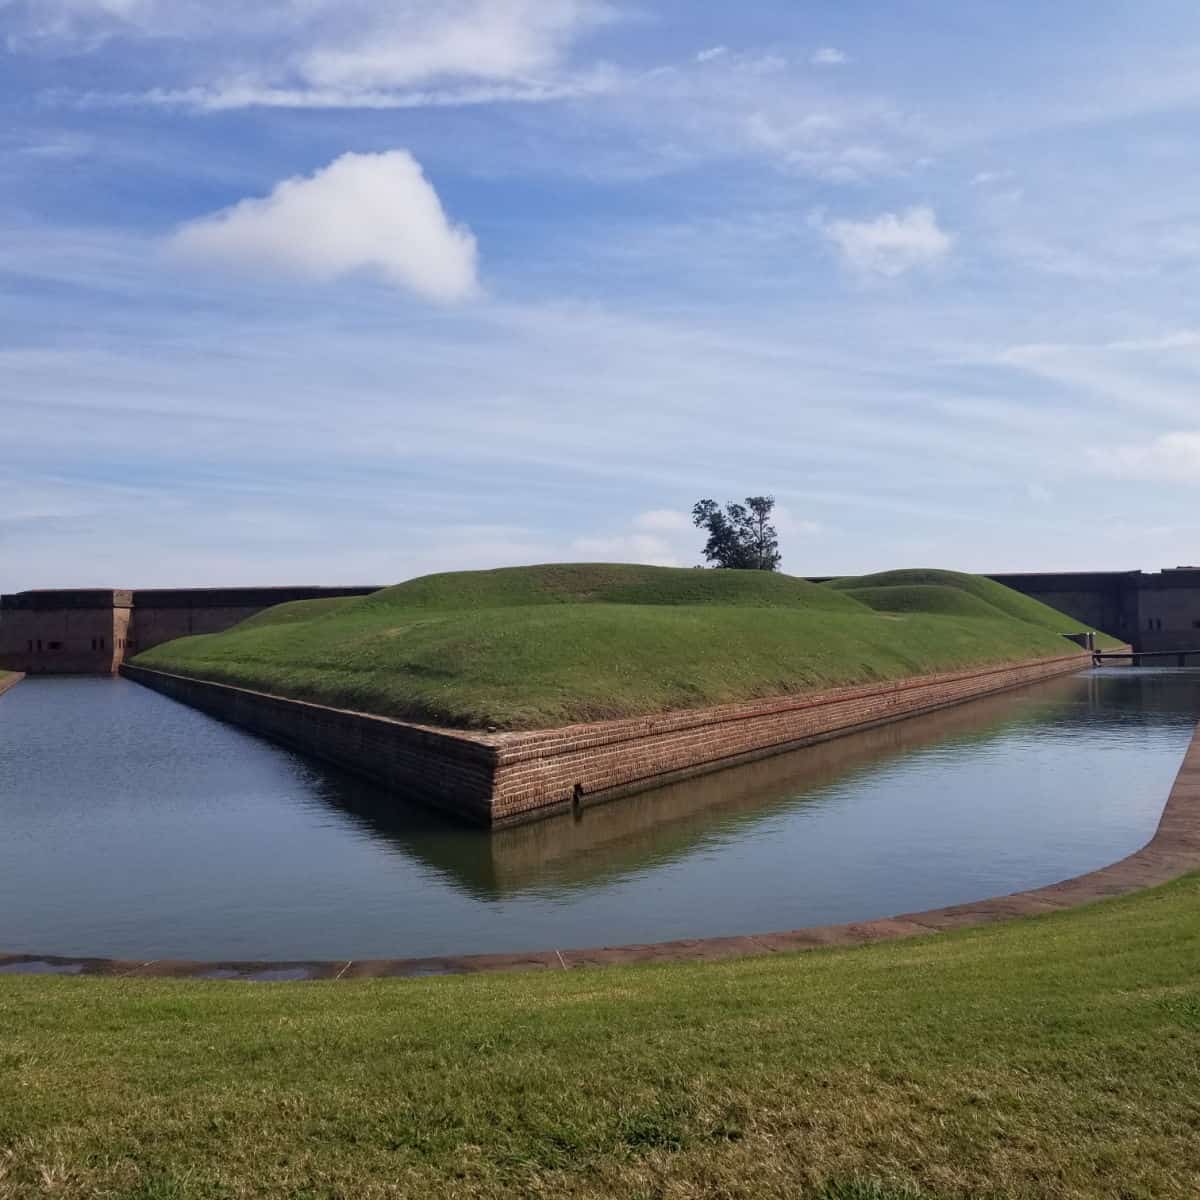 Water in the moat surrounding Fort Pulaski on a sunny day